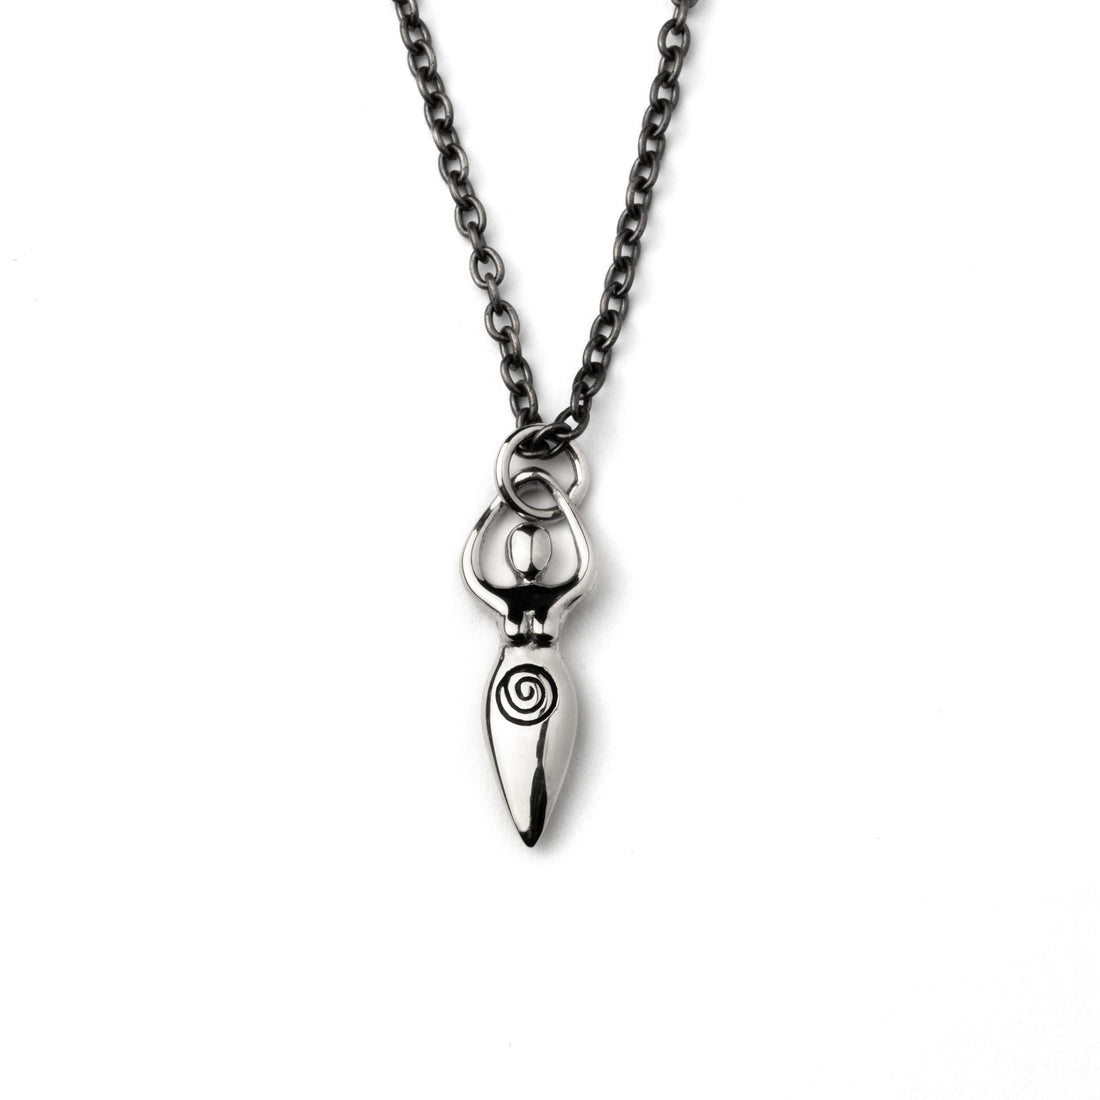 Tiny silver Fertility goddess with etched spiral charm on a necklace frontal view